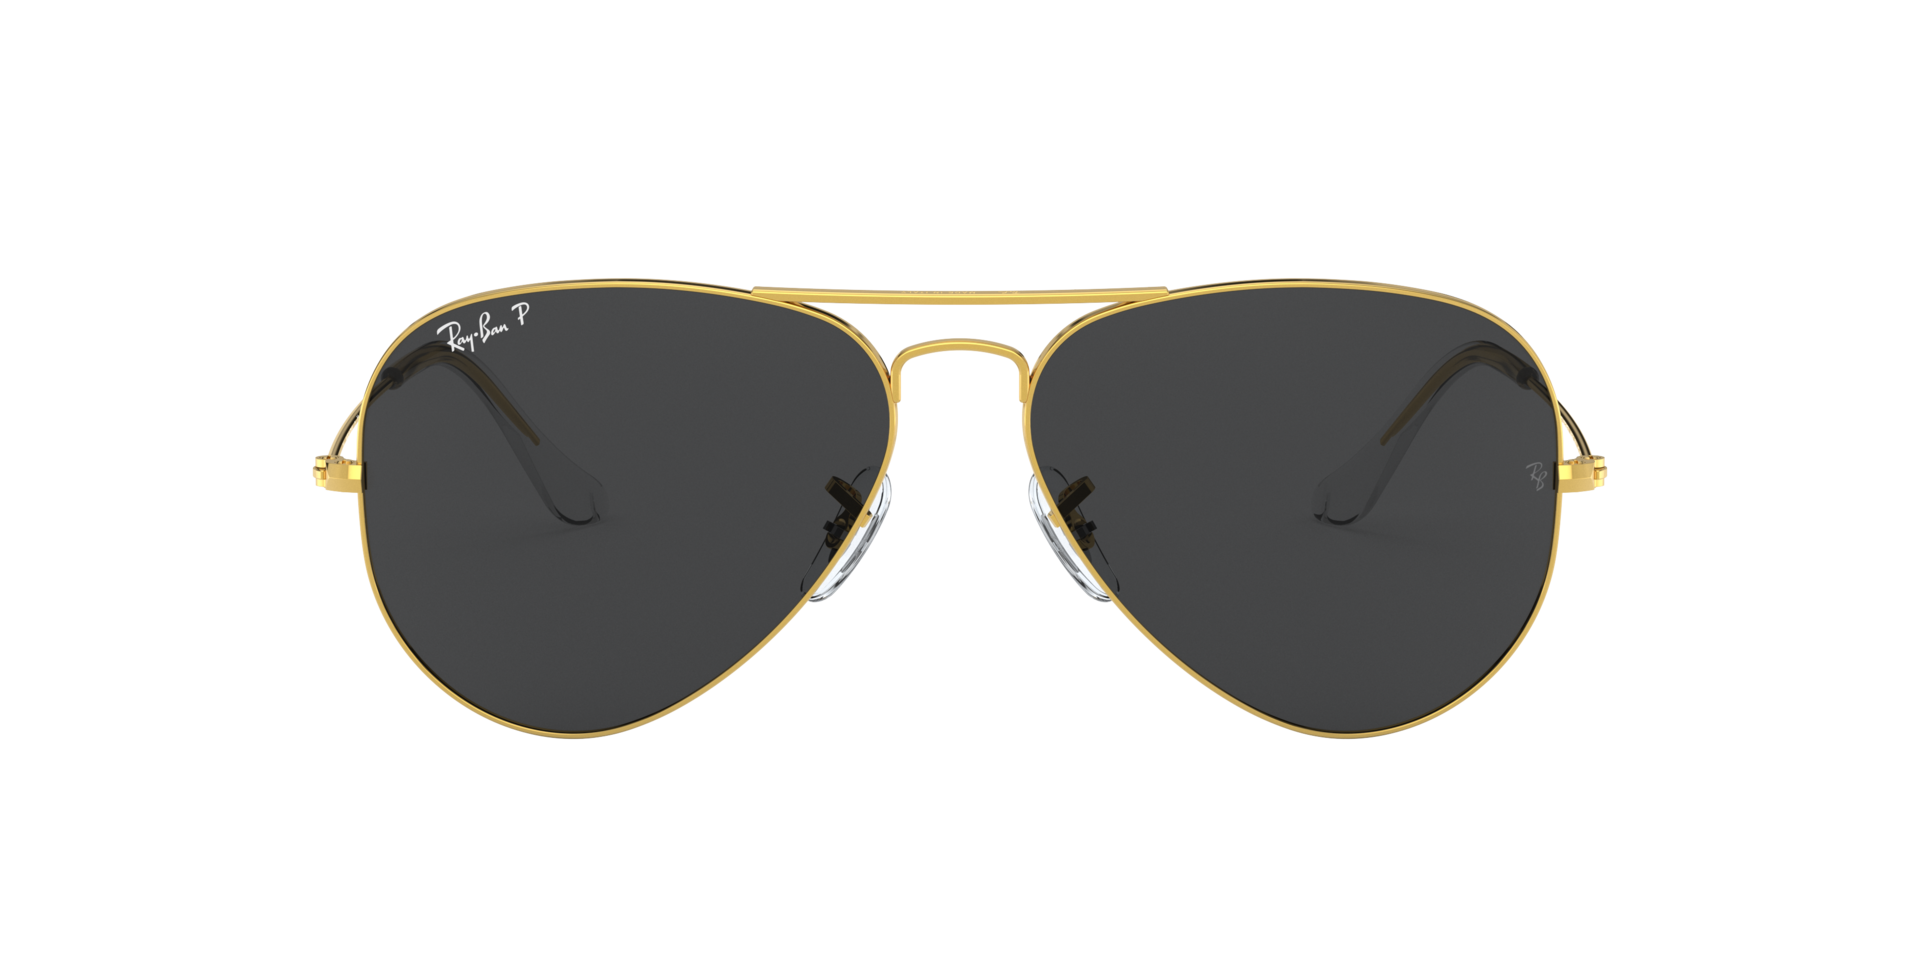 Ray Ban Aviator Large Metal Sonnenbrille RB3025 919648 62